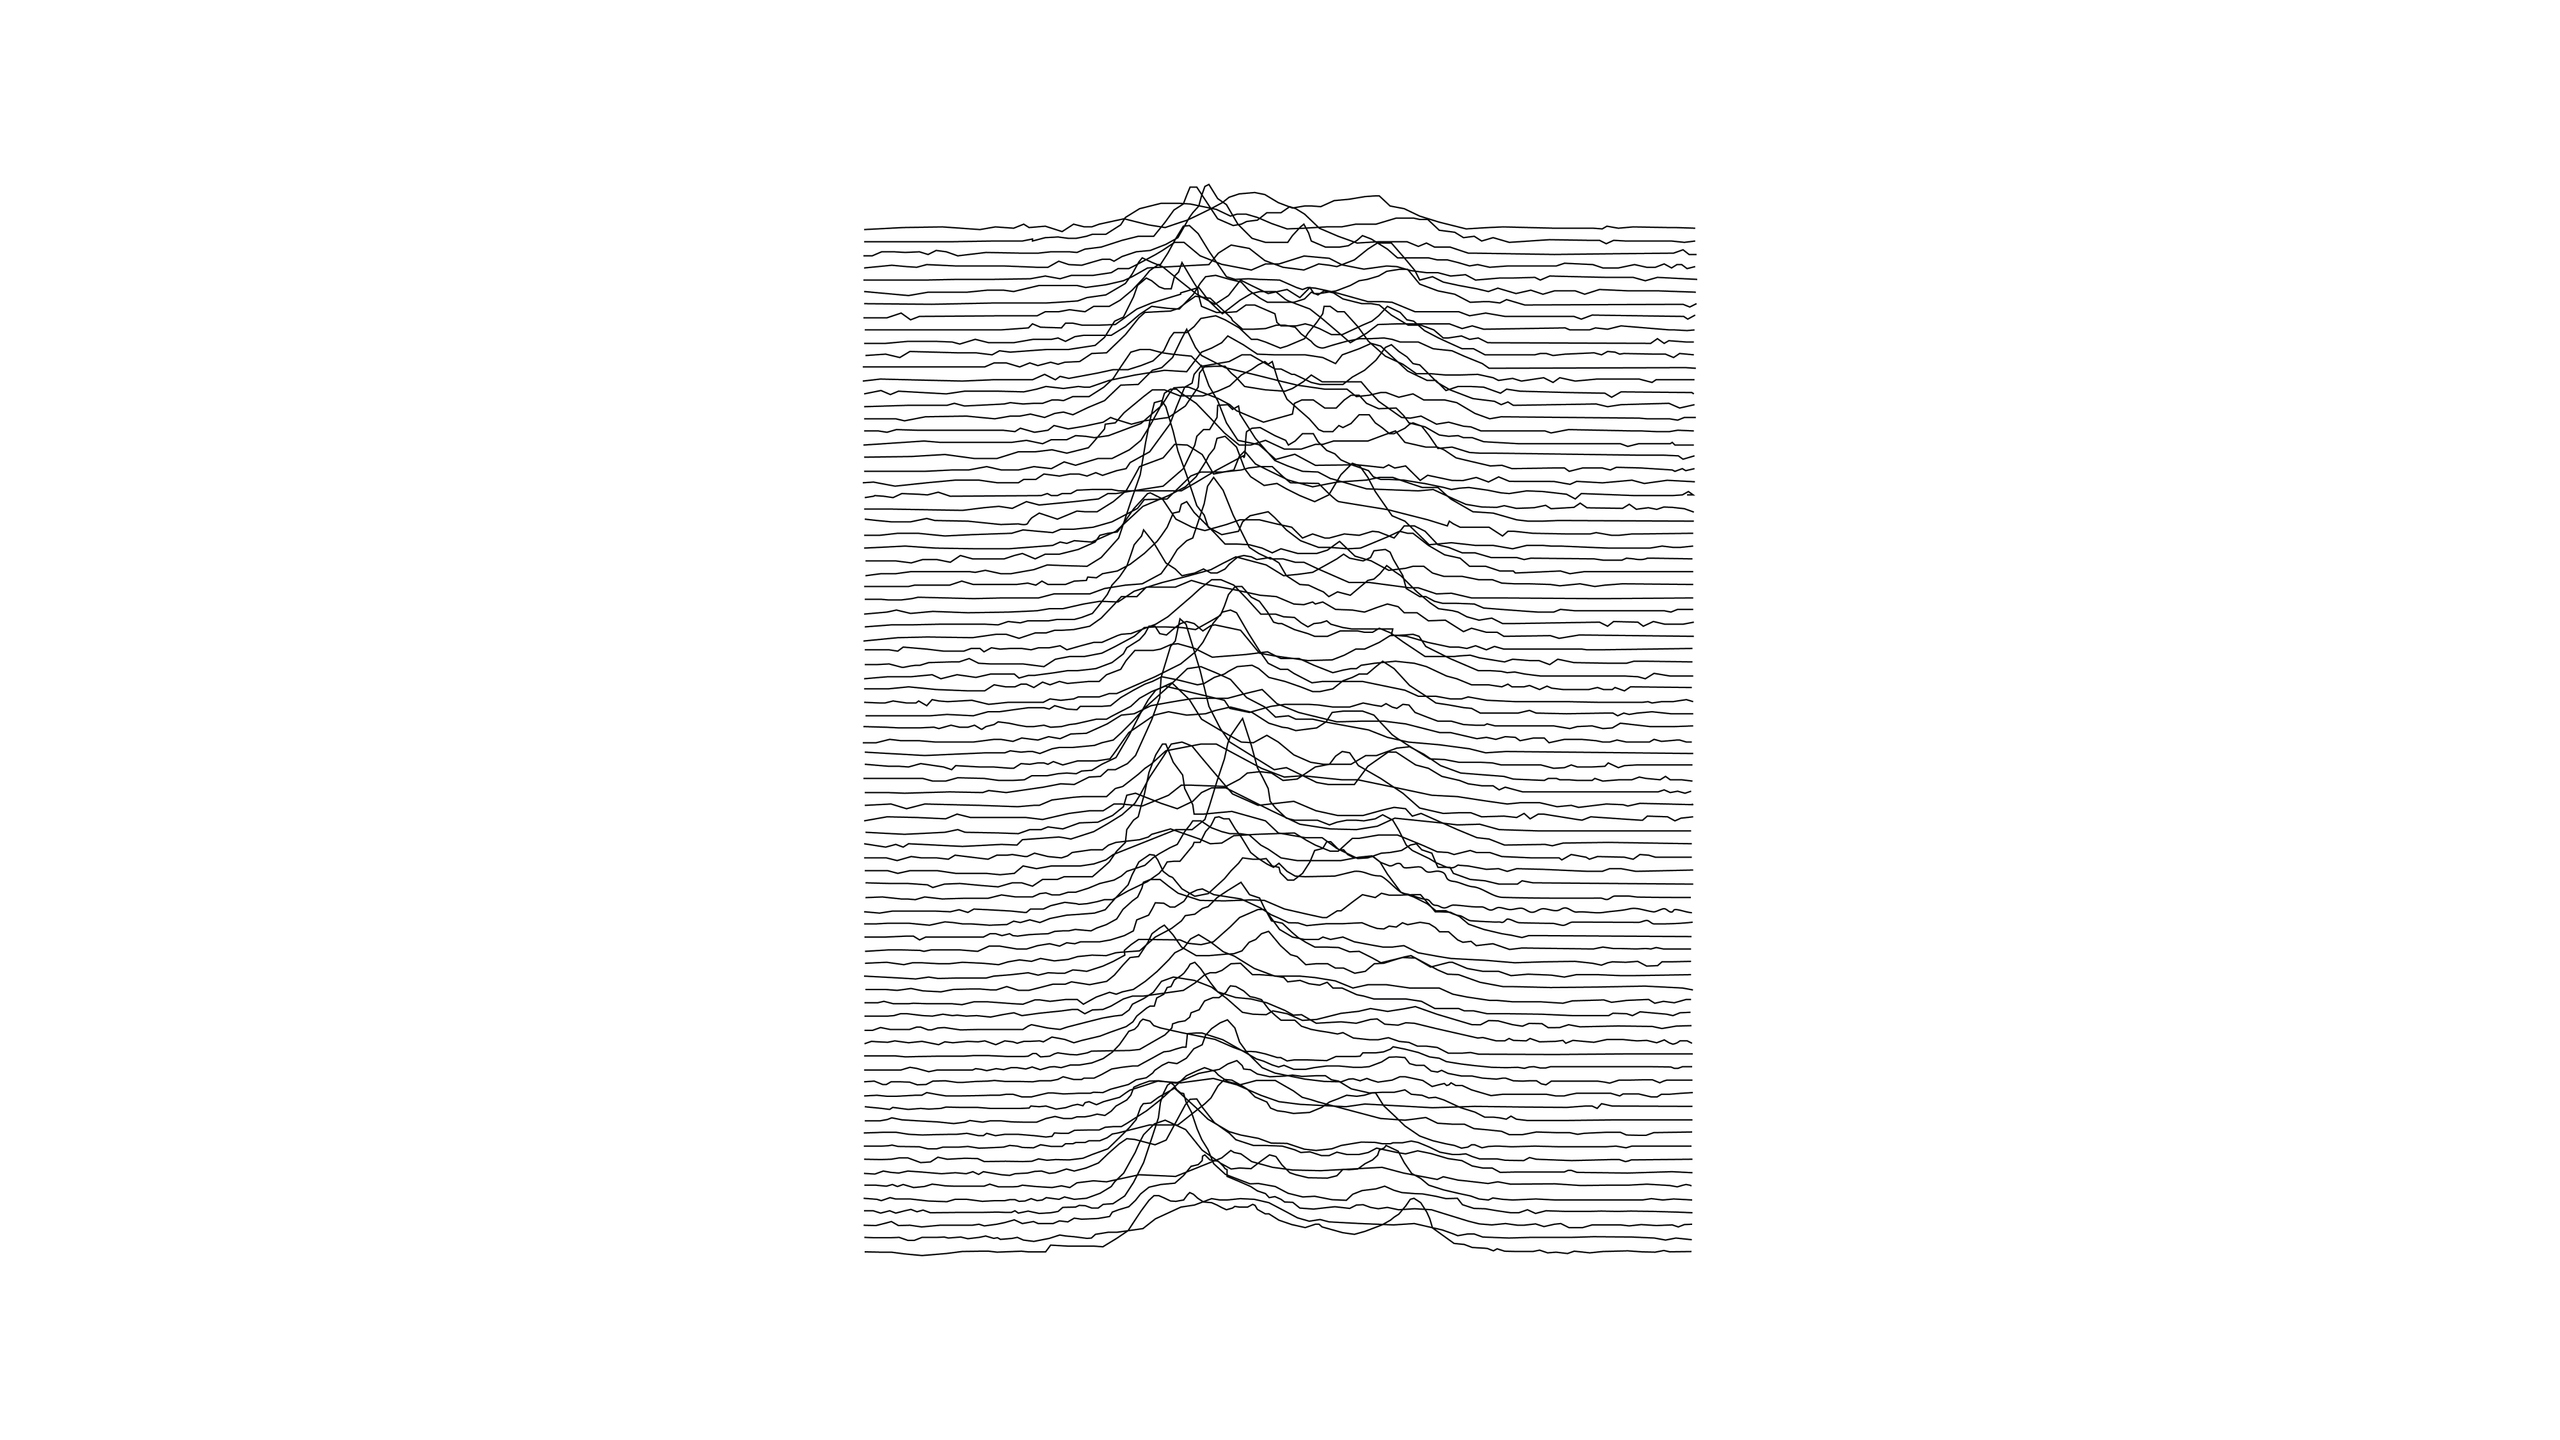 HD wallpaper Joy Division unknown pleasures sign tree communication   Wallpaper Flare